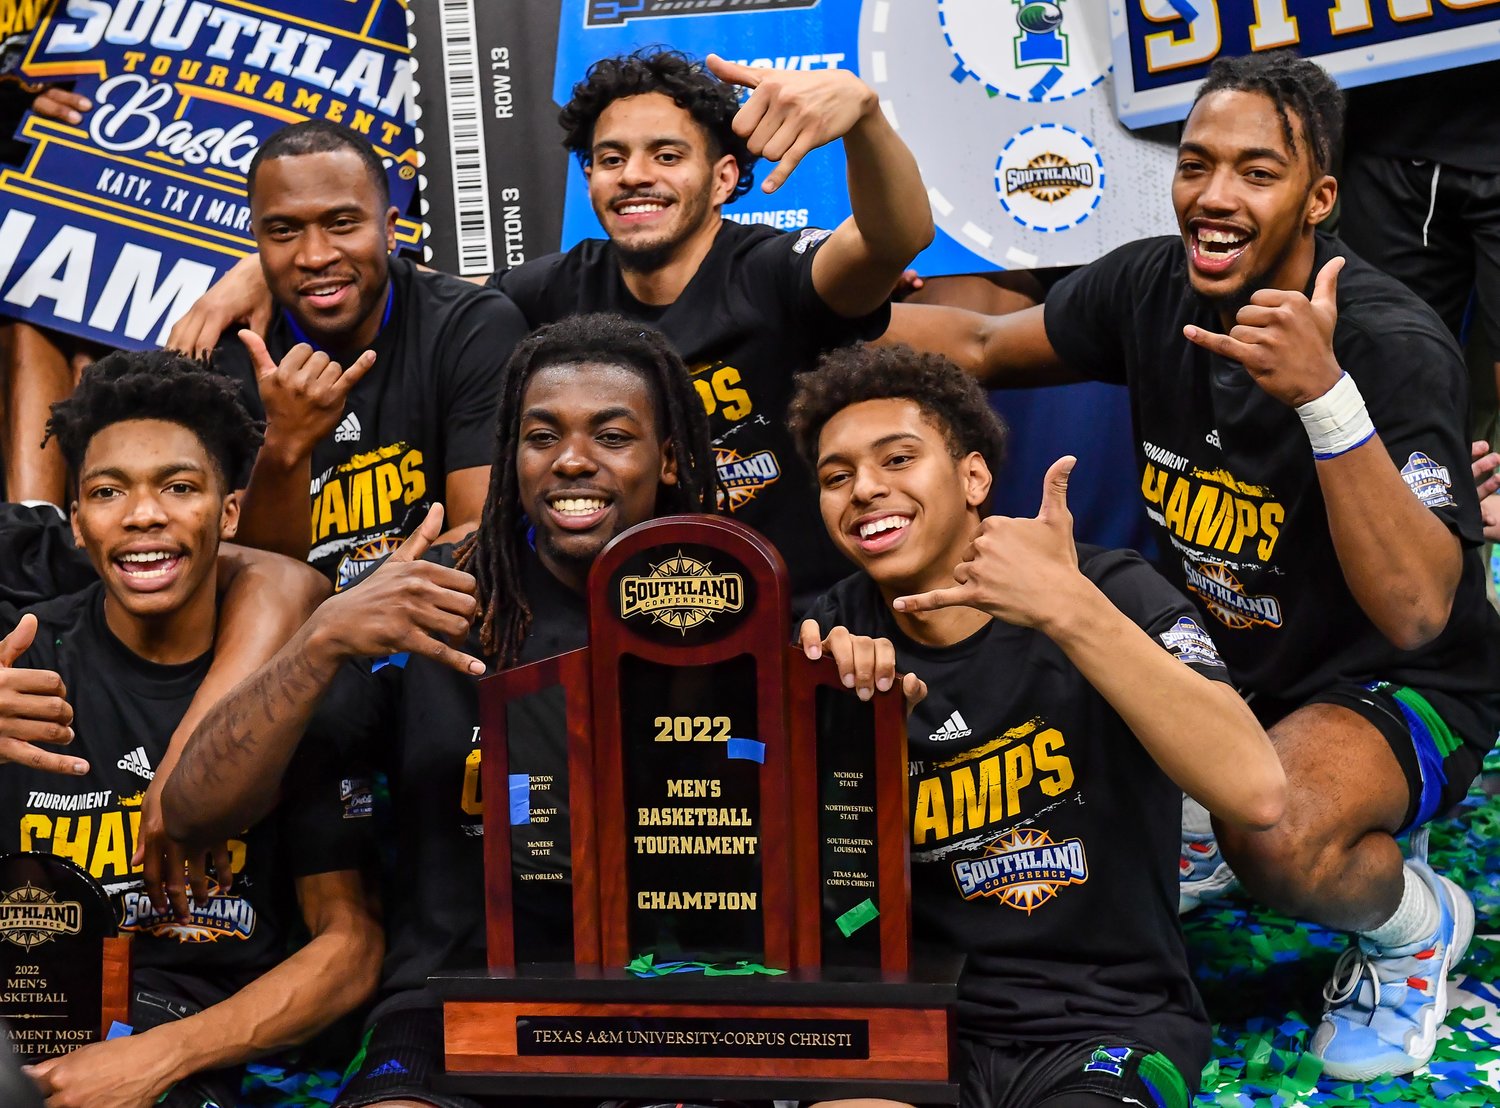 March 12, 2022:  A&M-Corpus Christi punches a ticket to March Madness after winning the Southland Conference Basketball Championship game between A&M Corpus Christi vs Southeastern Louisiana. (Photo by Mark Goodman / Katy Times)